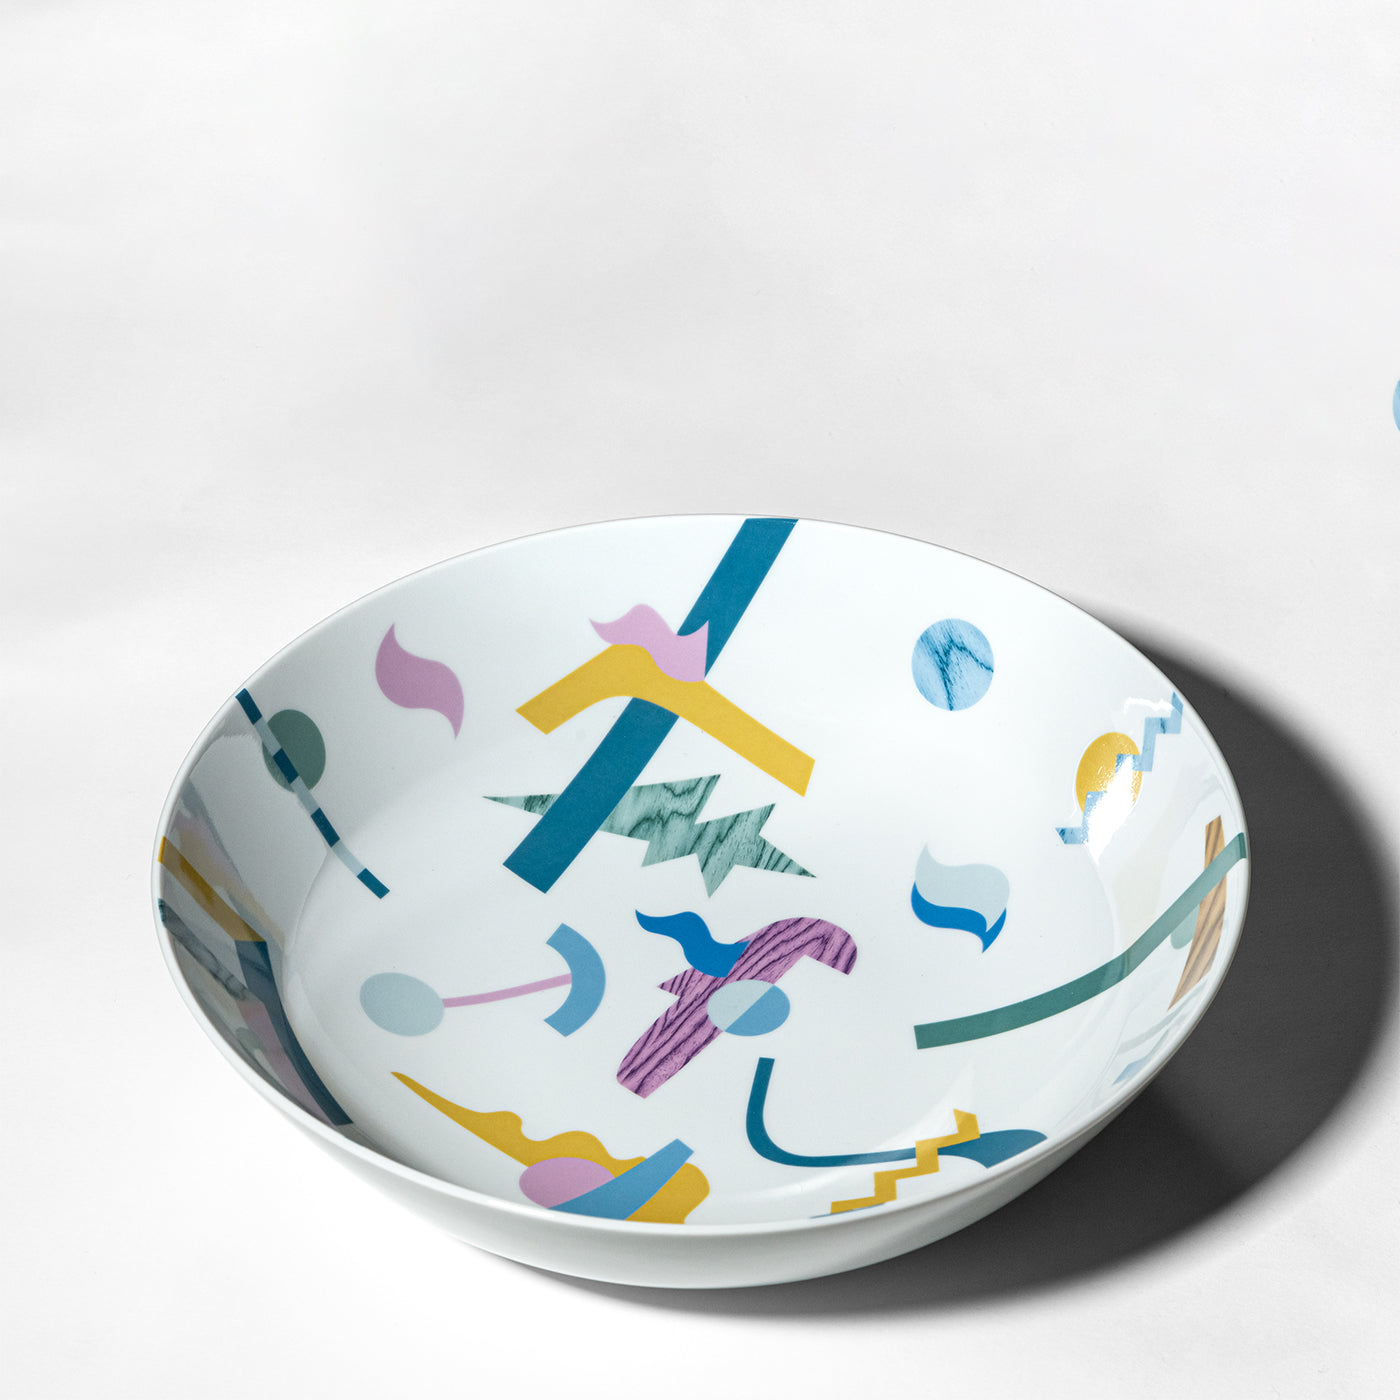 Alchimie Large Porcelain Bowl with Abstract Decor - Alternative view 3